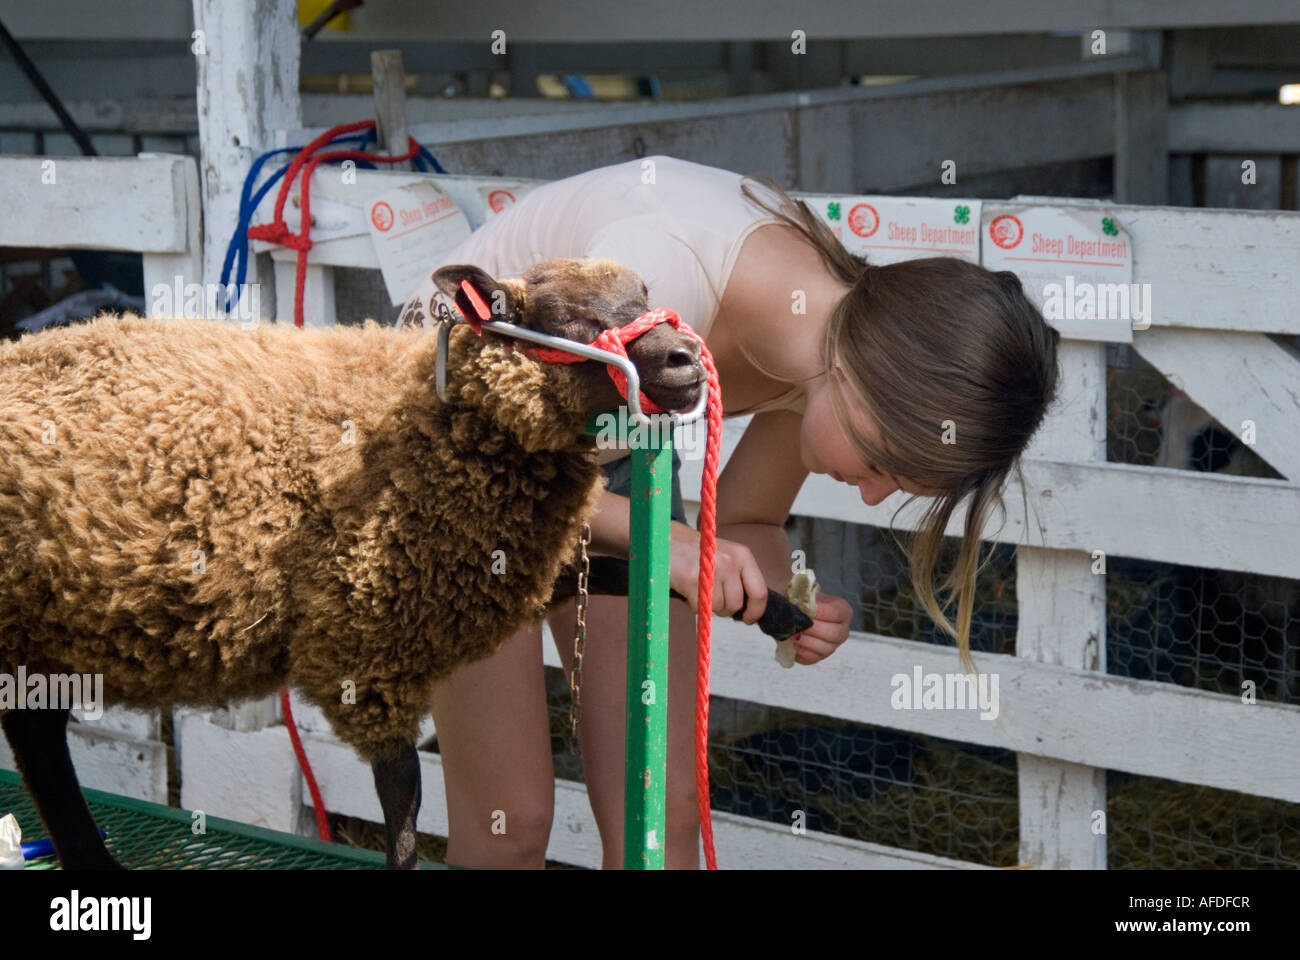 Girl Filing the Hooves of a Sheep in Preparation for 4H Club Livestock Show at the Columbia County Fair in Chatham NY Stock Photo